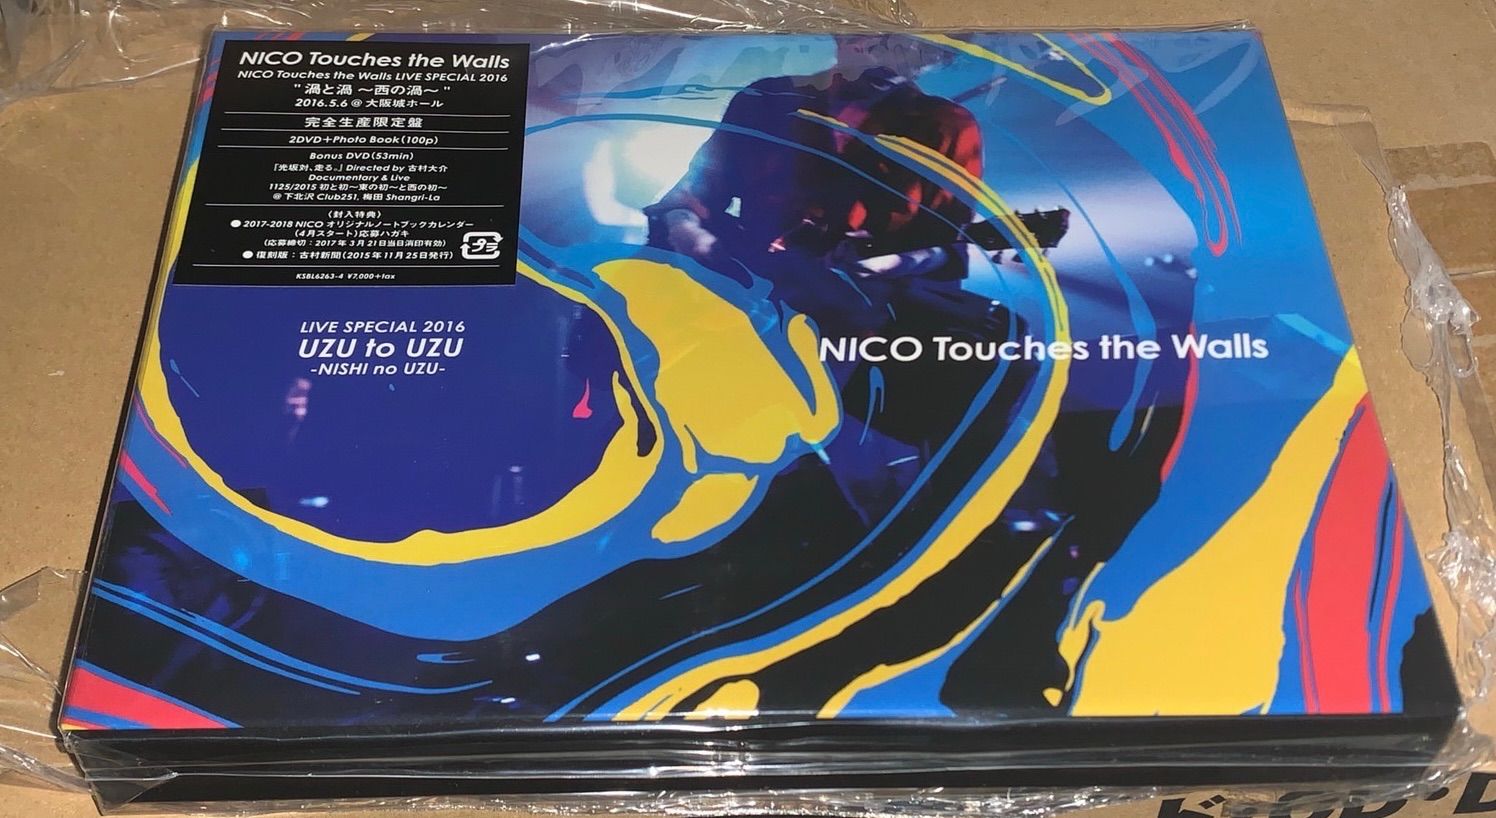 NICO Touches the Walls LIVE SPECIAL 2016 “渦と渦 〜西の渦〜” LIVE DVD  2016.05.06＠大阪城ホール(完全生産限定盤)【新品未開封】4547366289183 - メルカリ